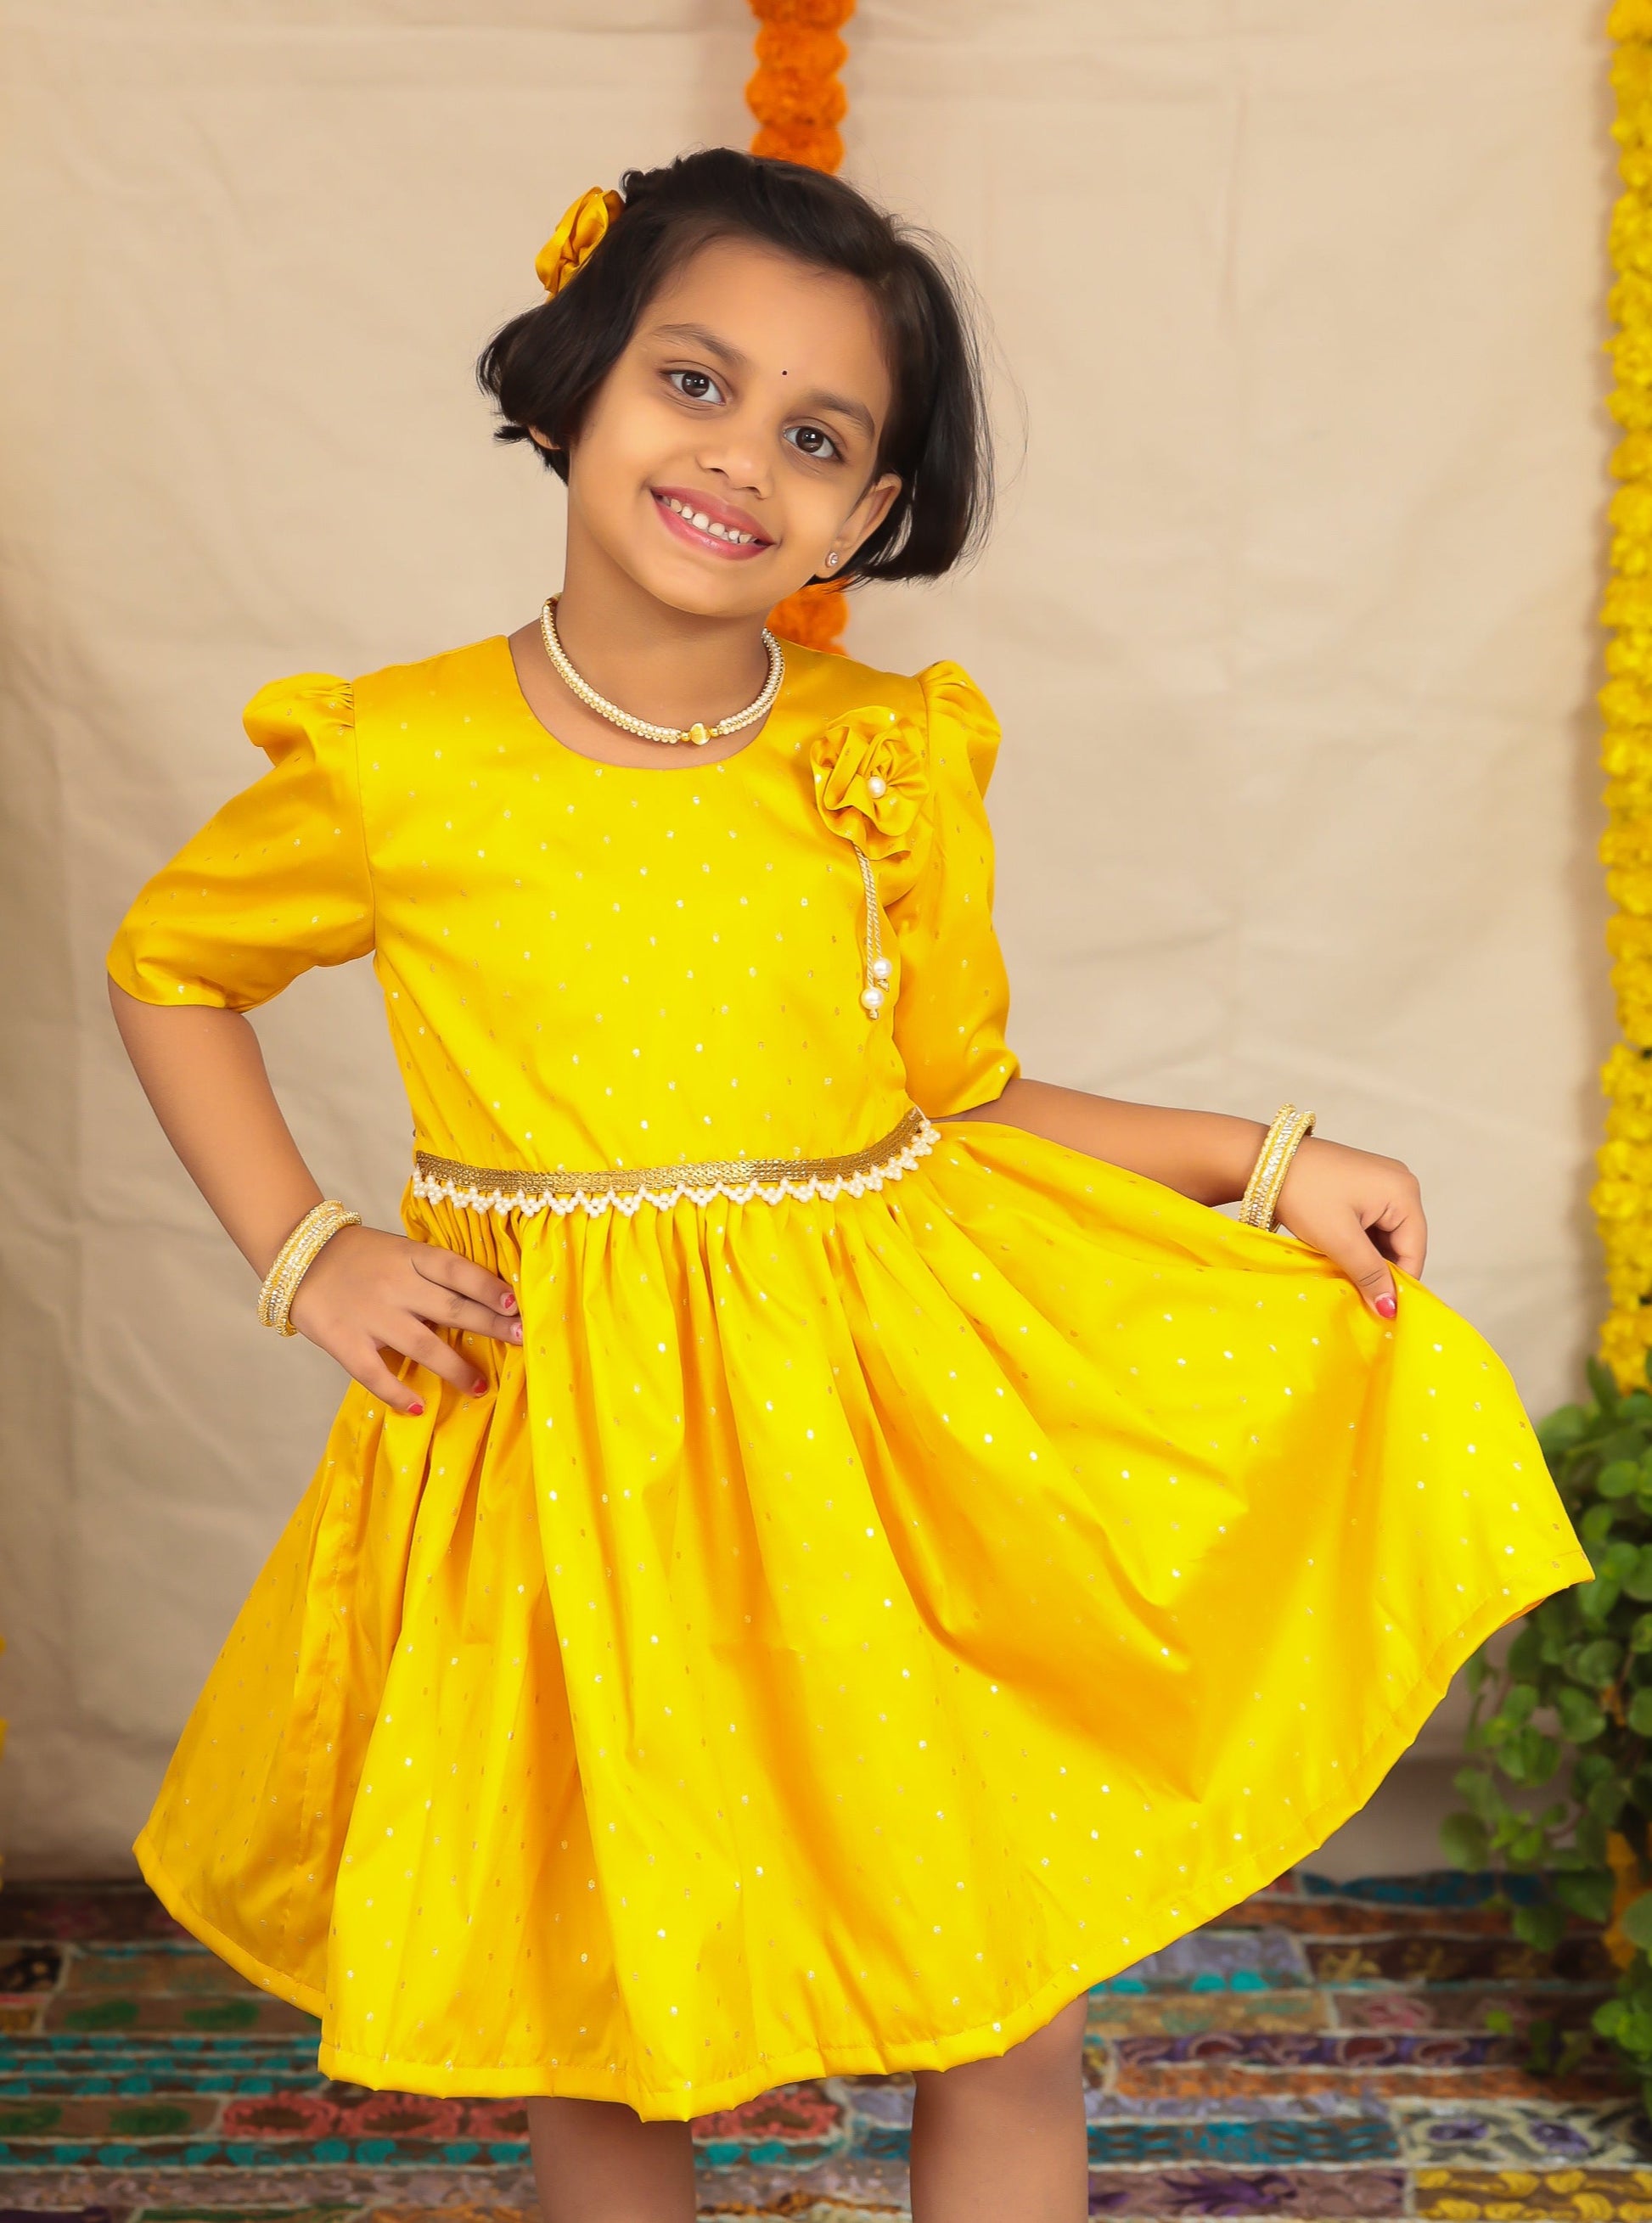 Yellow taffeta dress with elbow length puff sleeves for Girl.Let your princess be as comfortable as in her casuals with carefully designed & crafted Comfort Ethnic Wear by Soyara Ethnics.Keep her fashion quotient high with timeless patterns, vibrant combinations and royal textiles.